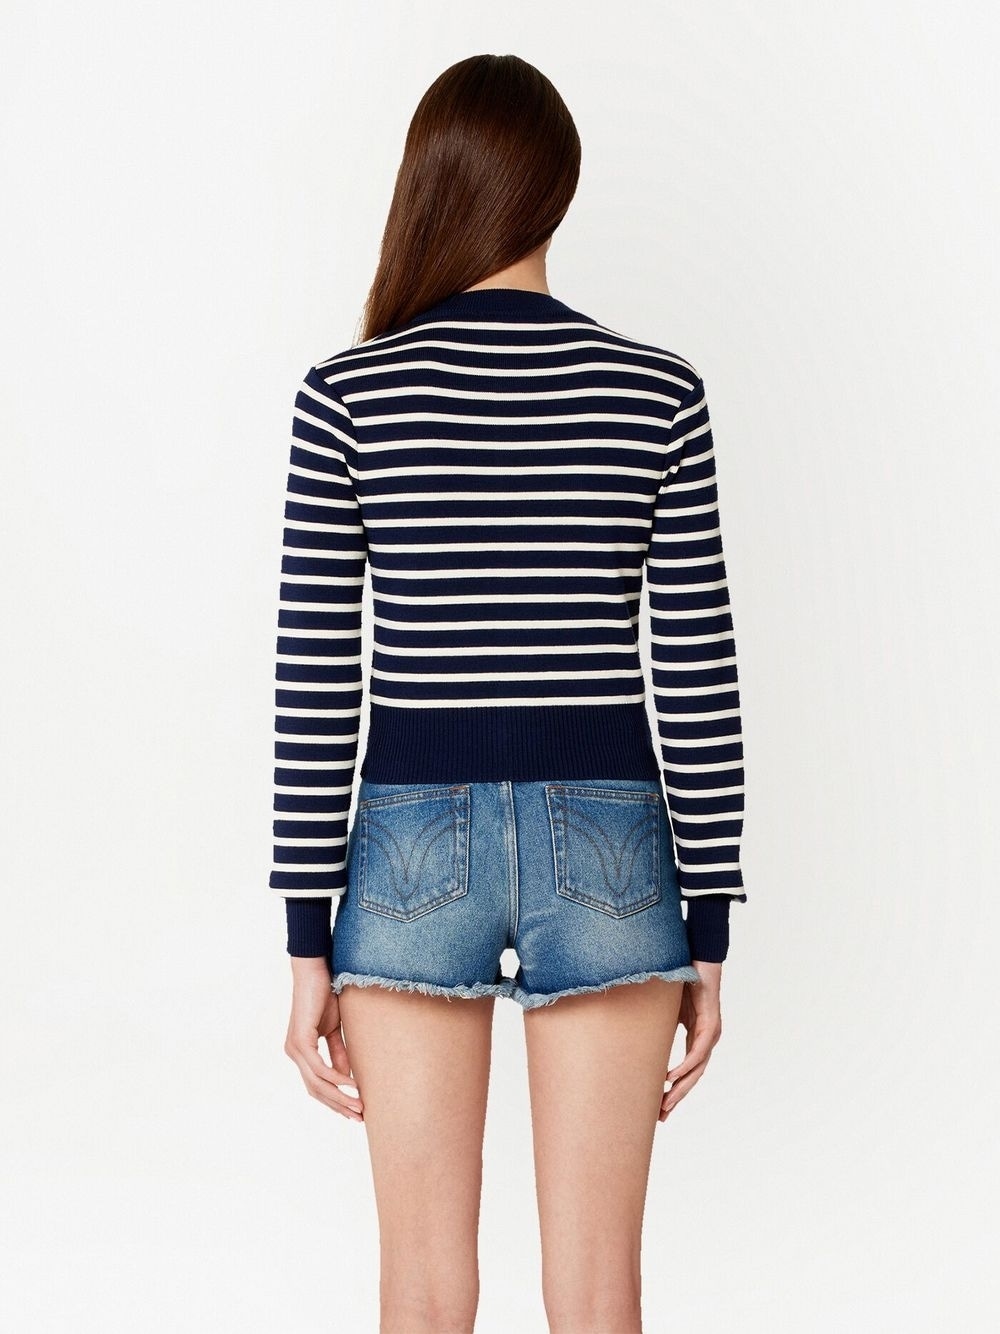 Ami paris sailor stripes cropped sweater アウトレットと限定 トップス